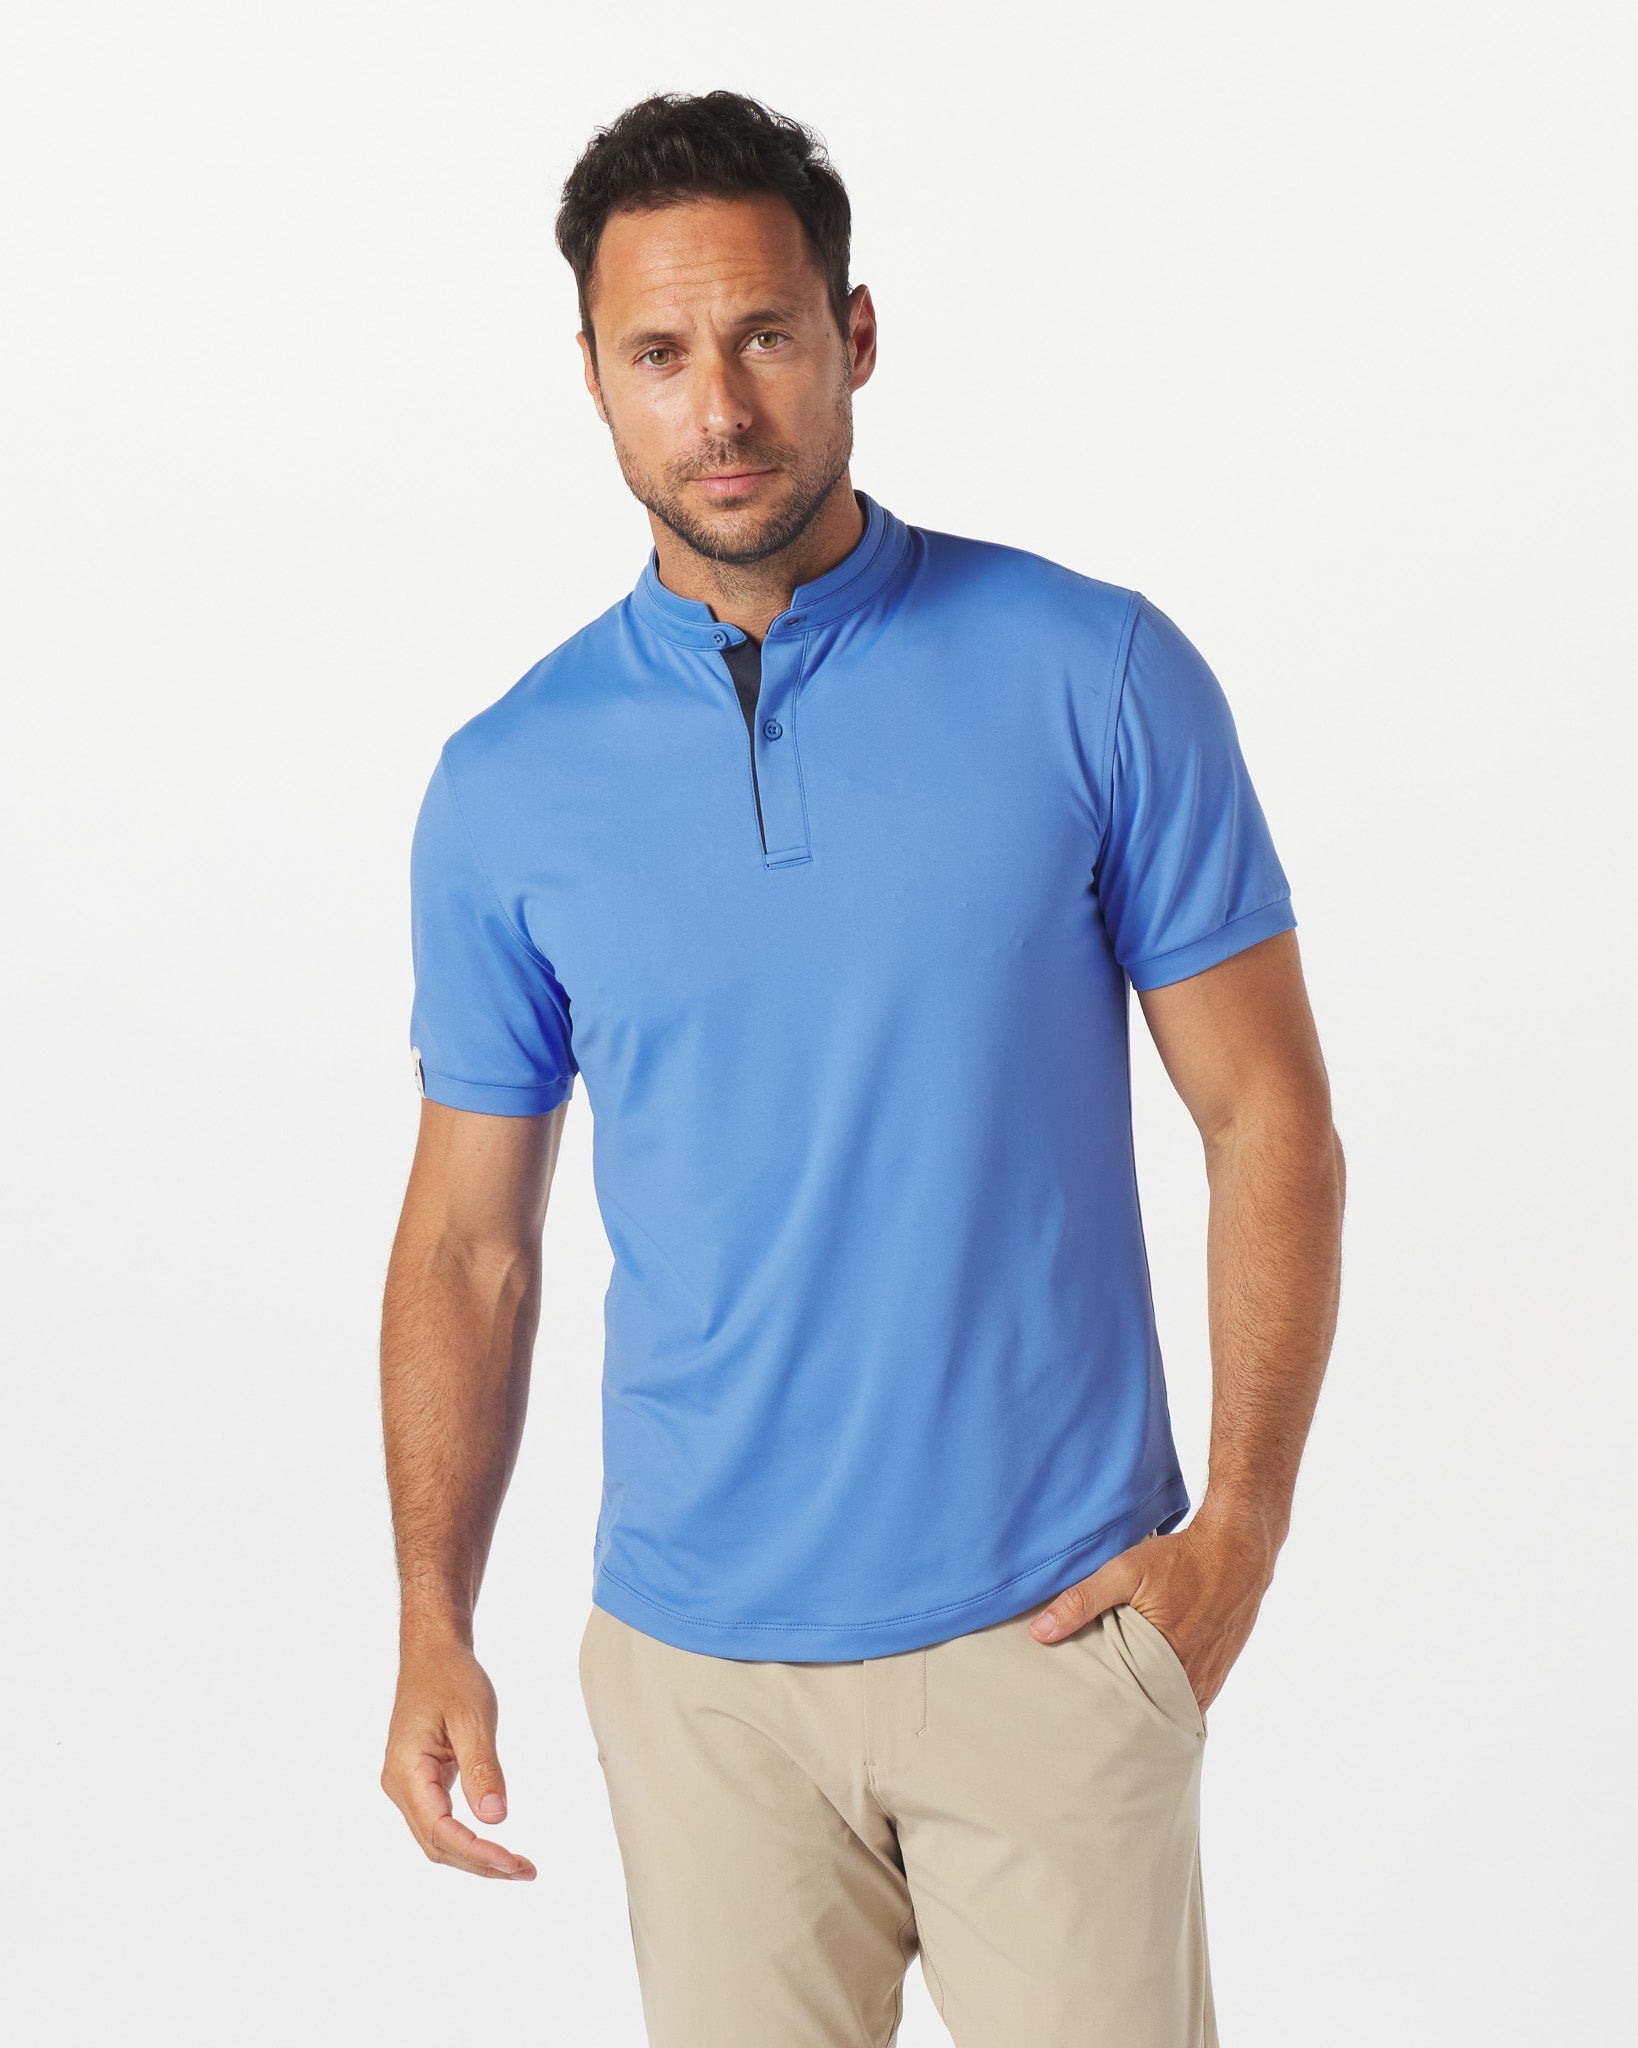 Catalyst Polo | MANTRA Collar | MACAW